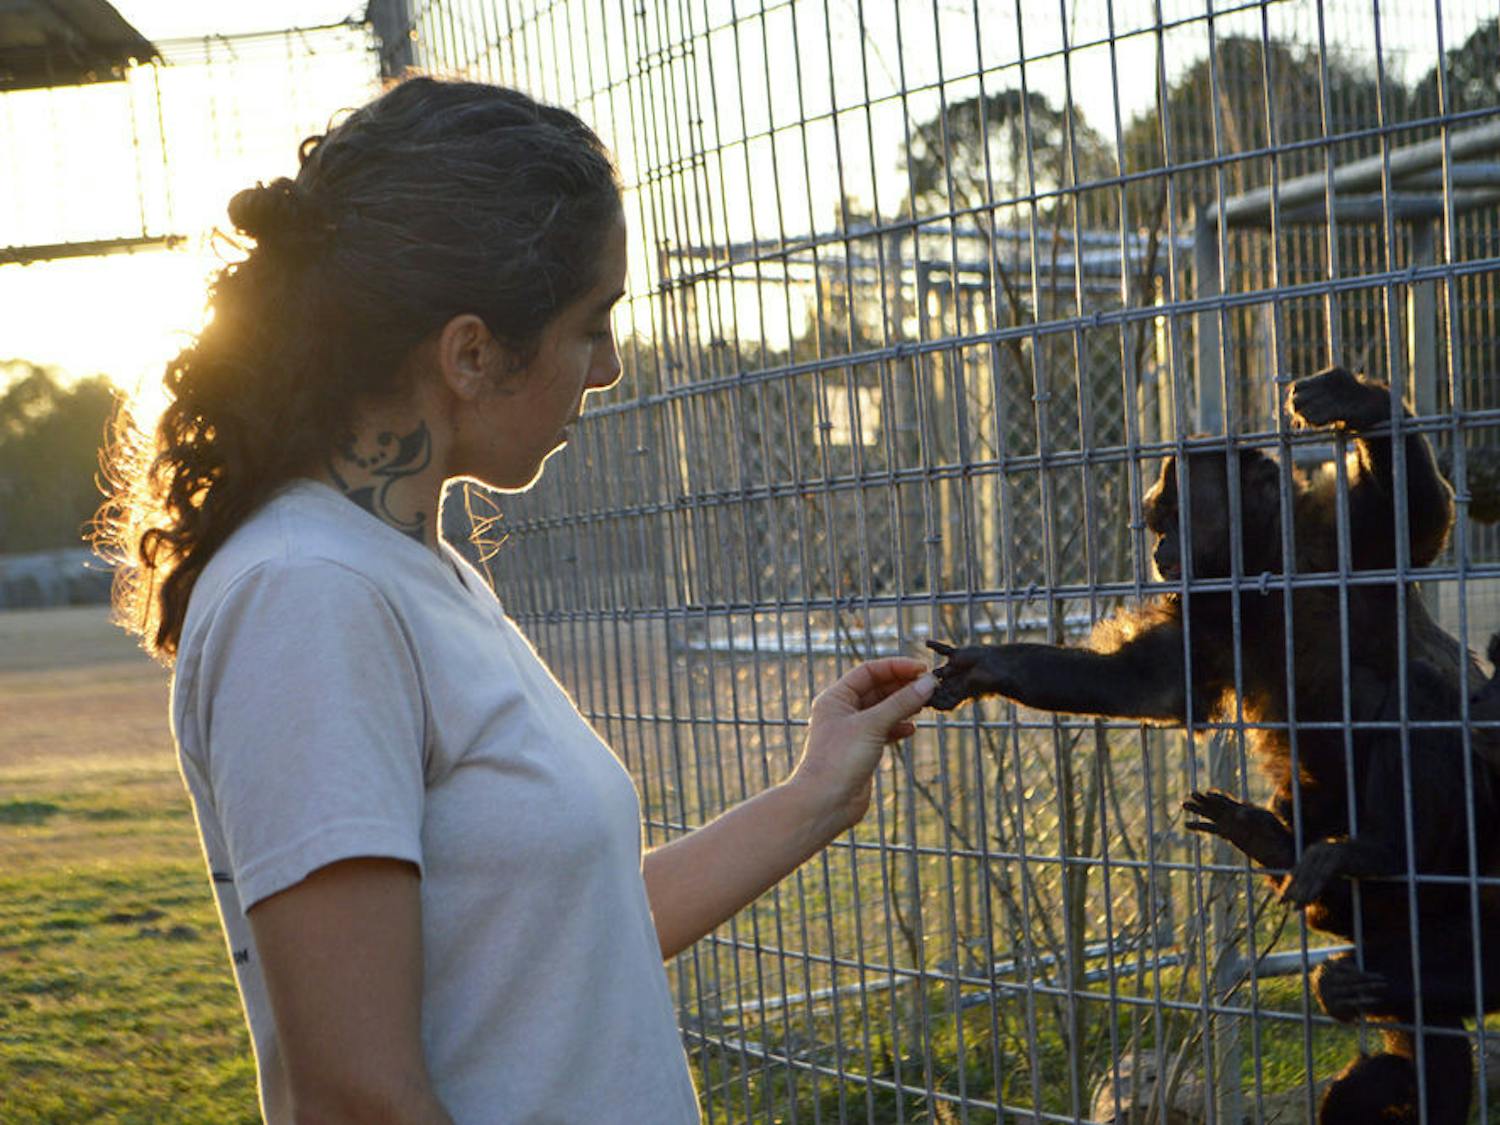 Veronika Blanco, a caretaker at Jungle Friends Primate Sanctuary, feeds peanuts to her Brown-Faced Capuchin Monkeys for their afternoon treats. Most of the monkeys Blanco cares for come from medical testing centers and live out the rest of their lives with other Capuchins at Jungle Friends.